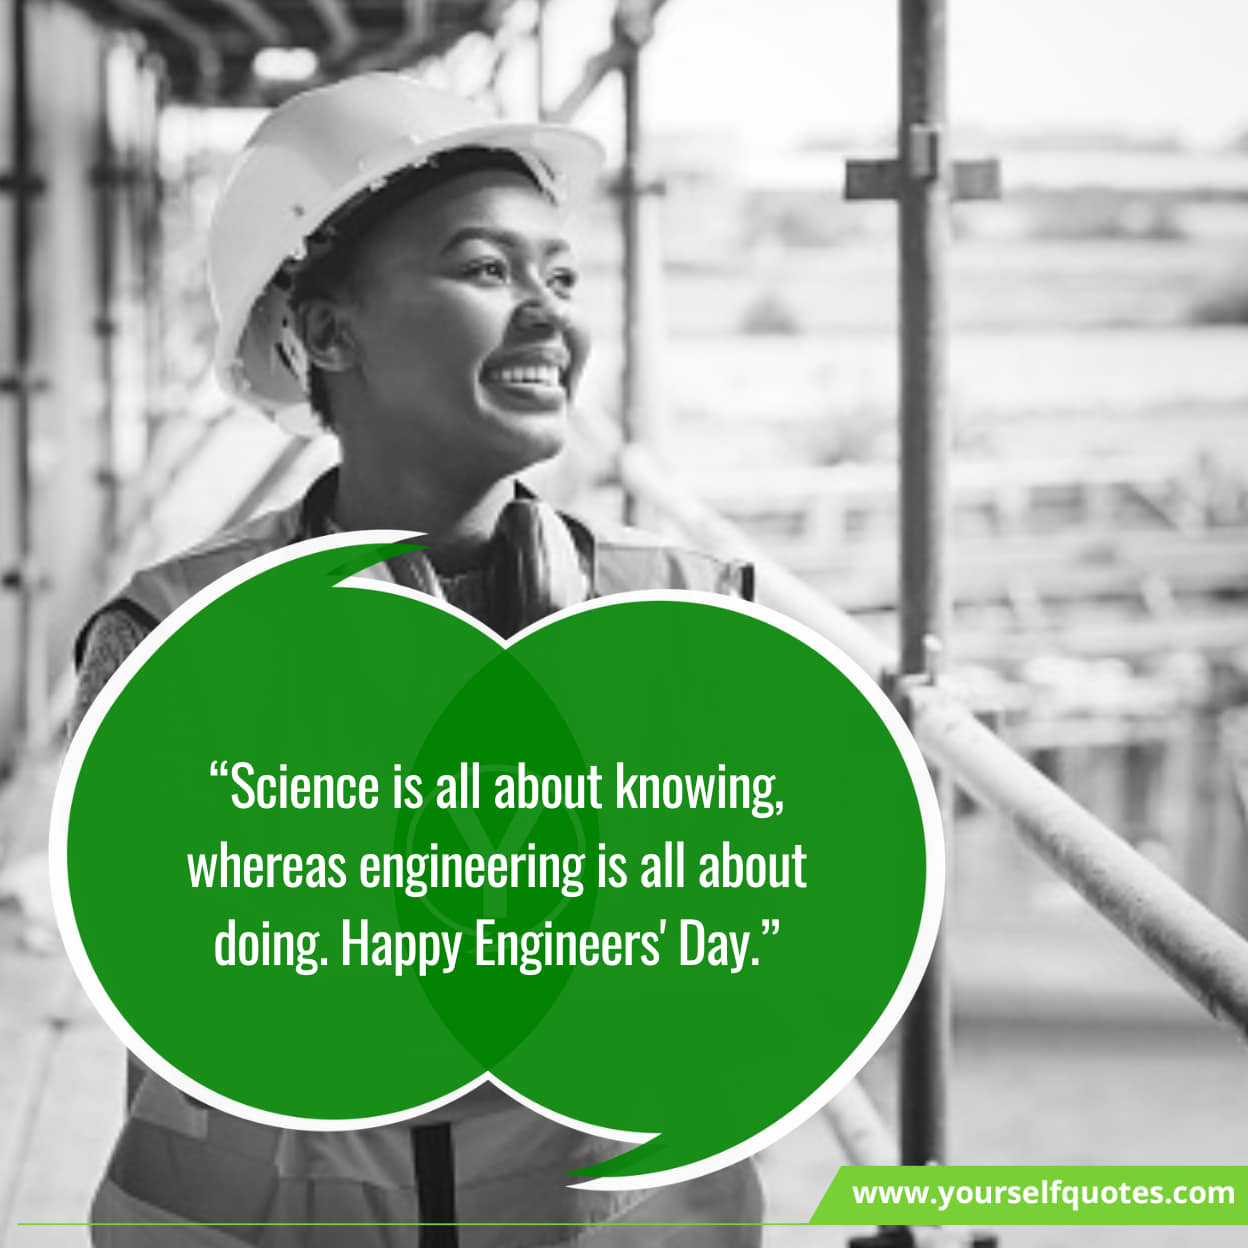 Best Happy Engineers Day Wishes